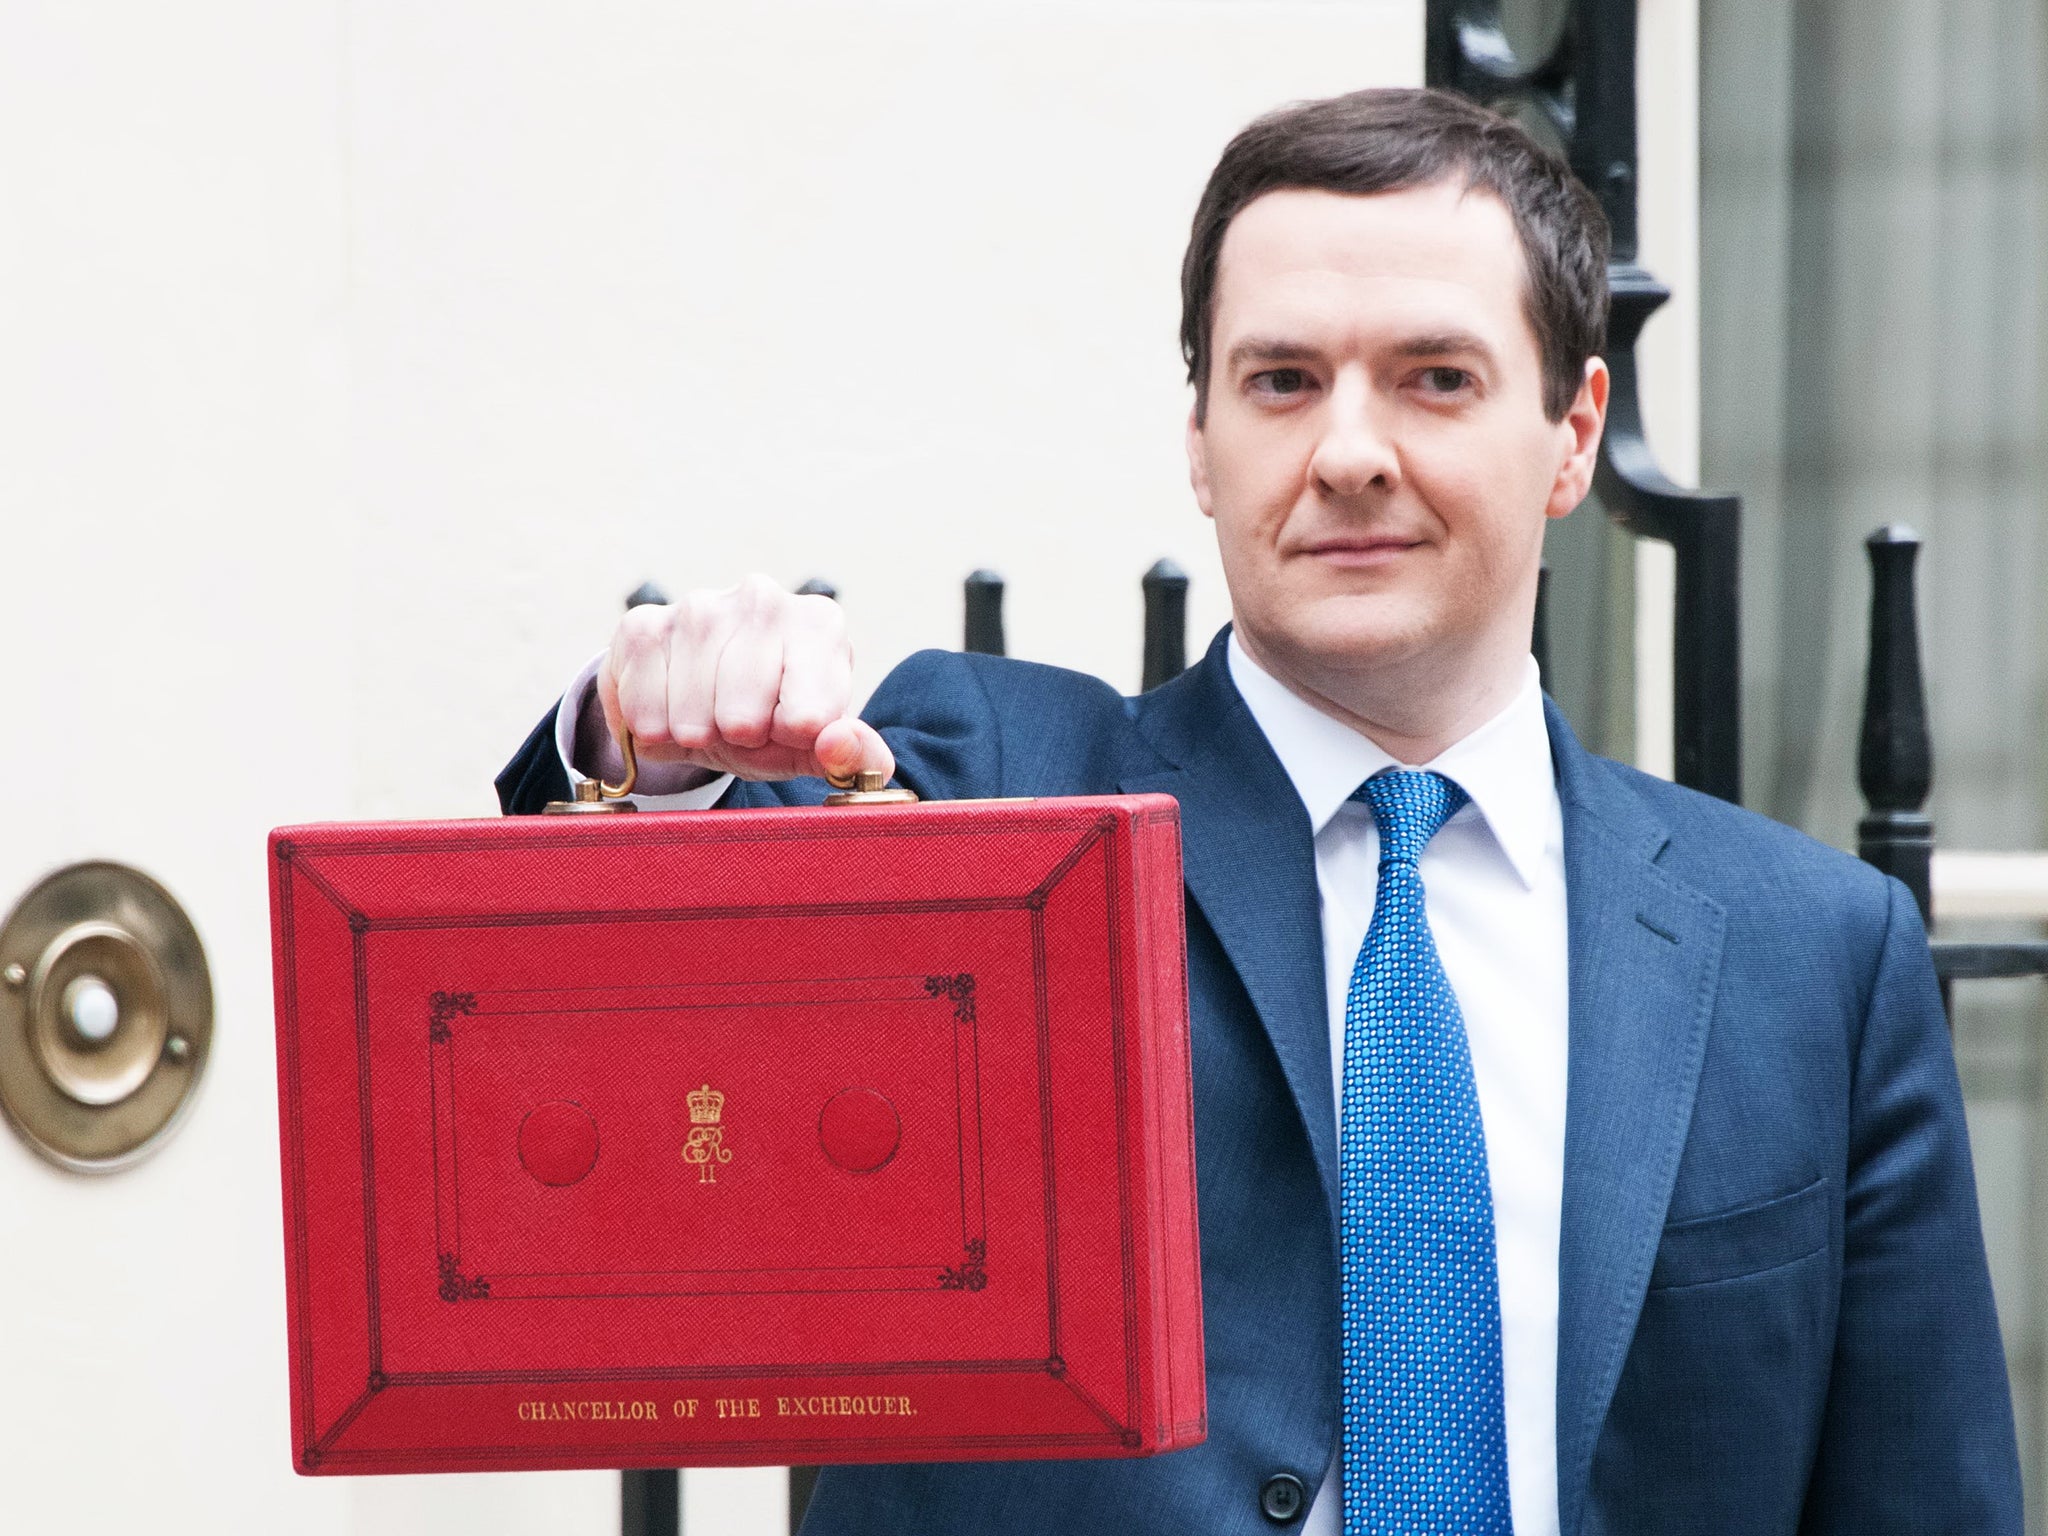 The Institute for Fiscal Studies has also warned Osborne's fiscal charter is a flawed way to manage the public's finances